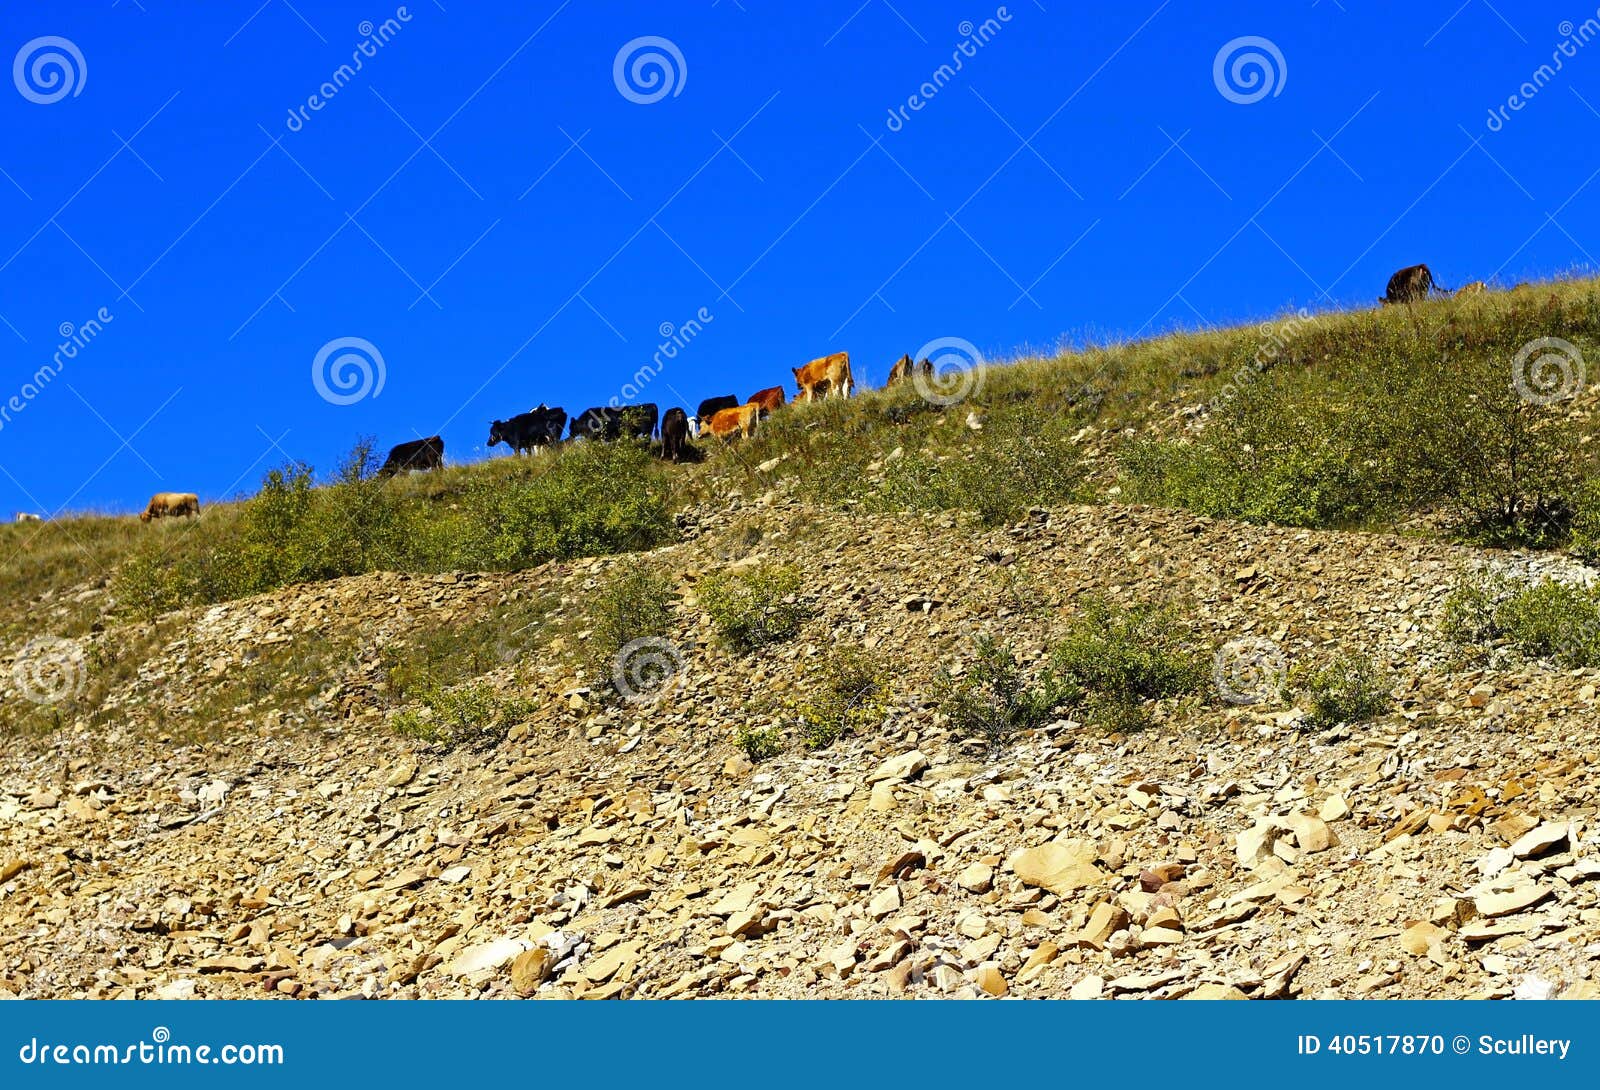 Many Cows On The Caucasus Mountain Grassland Stock Photo Image Of